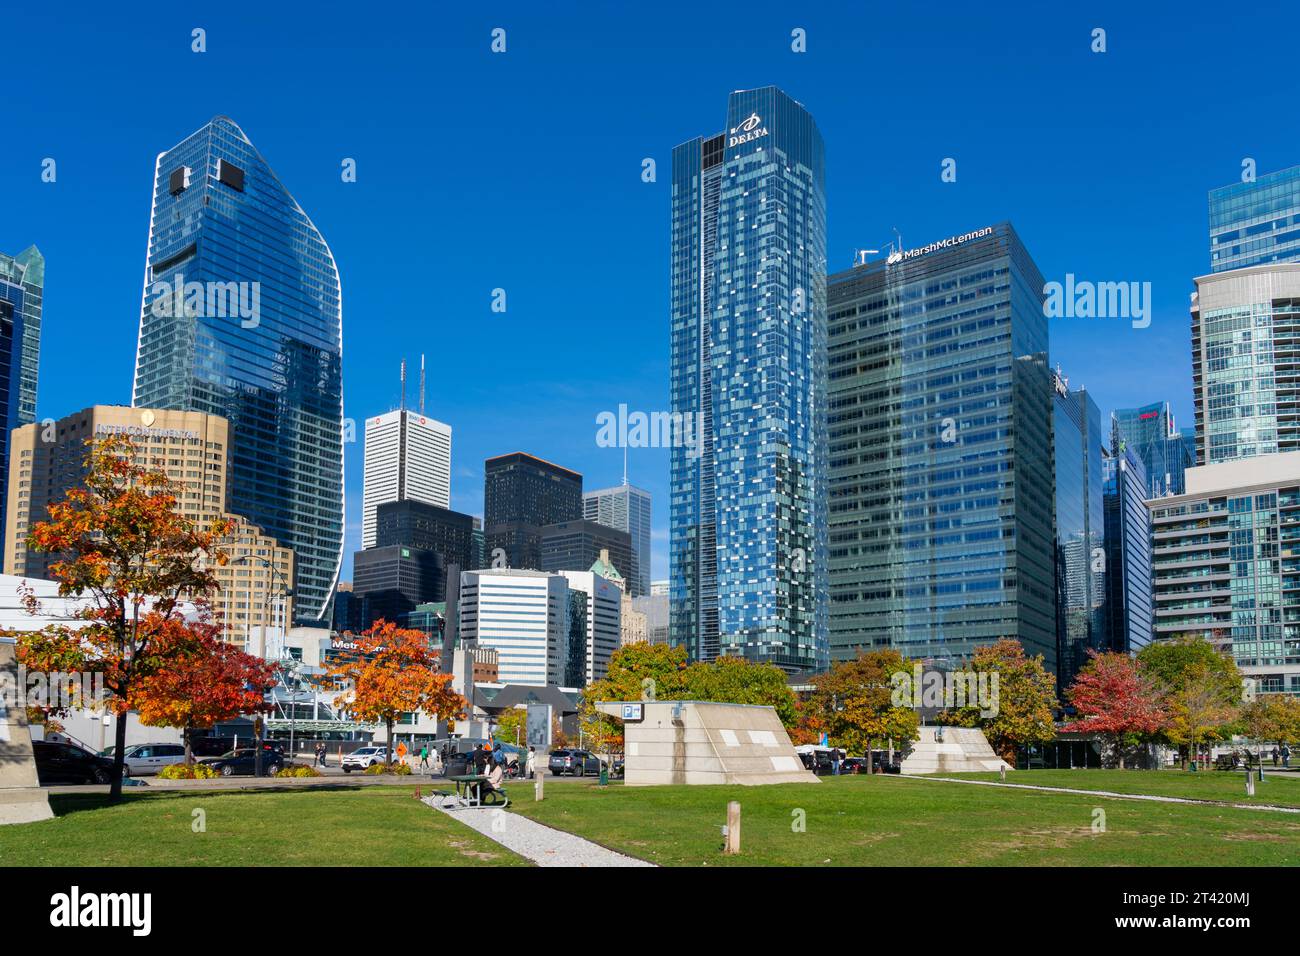 Toronto skyline at Bremner Blvd street and Lower Simcoe St, near Ripley's Aquarium of Canada looking East in Toronto, Canada Stock Photo